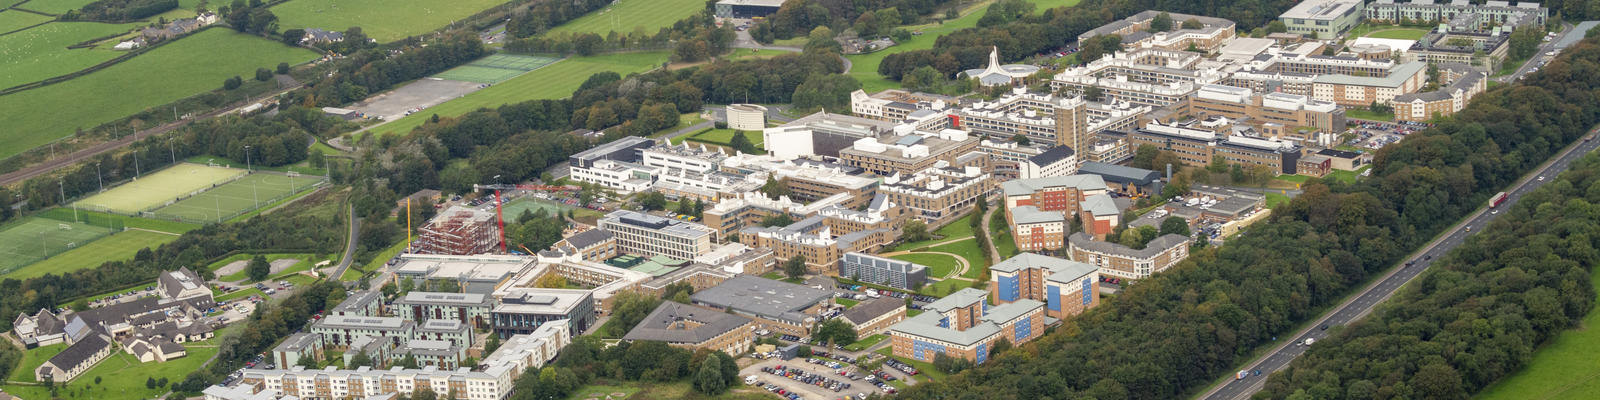 Lancaster University campus from above